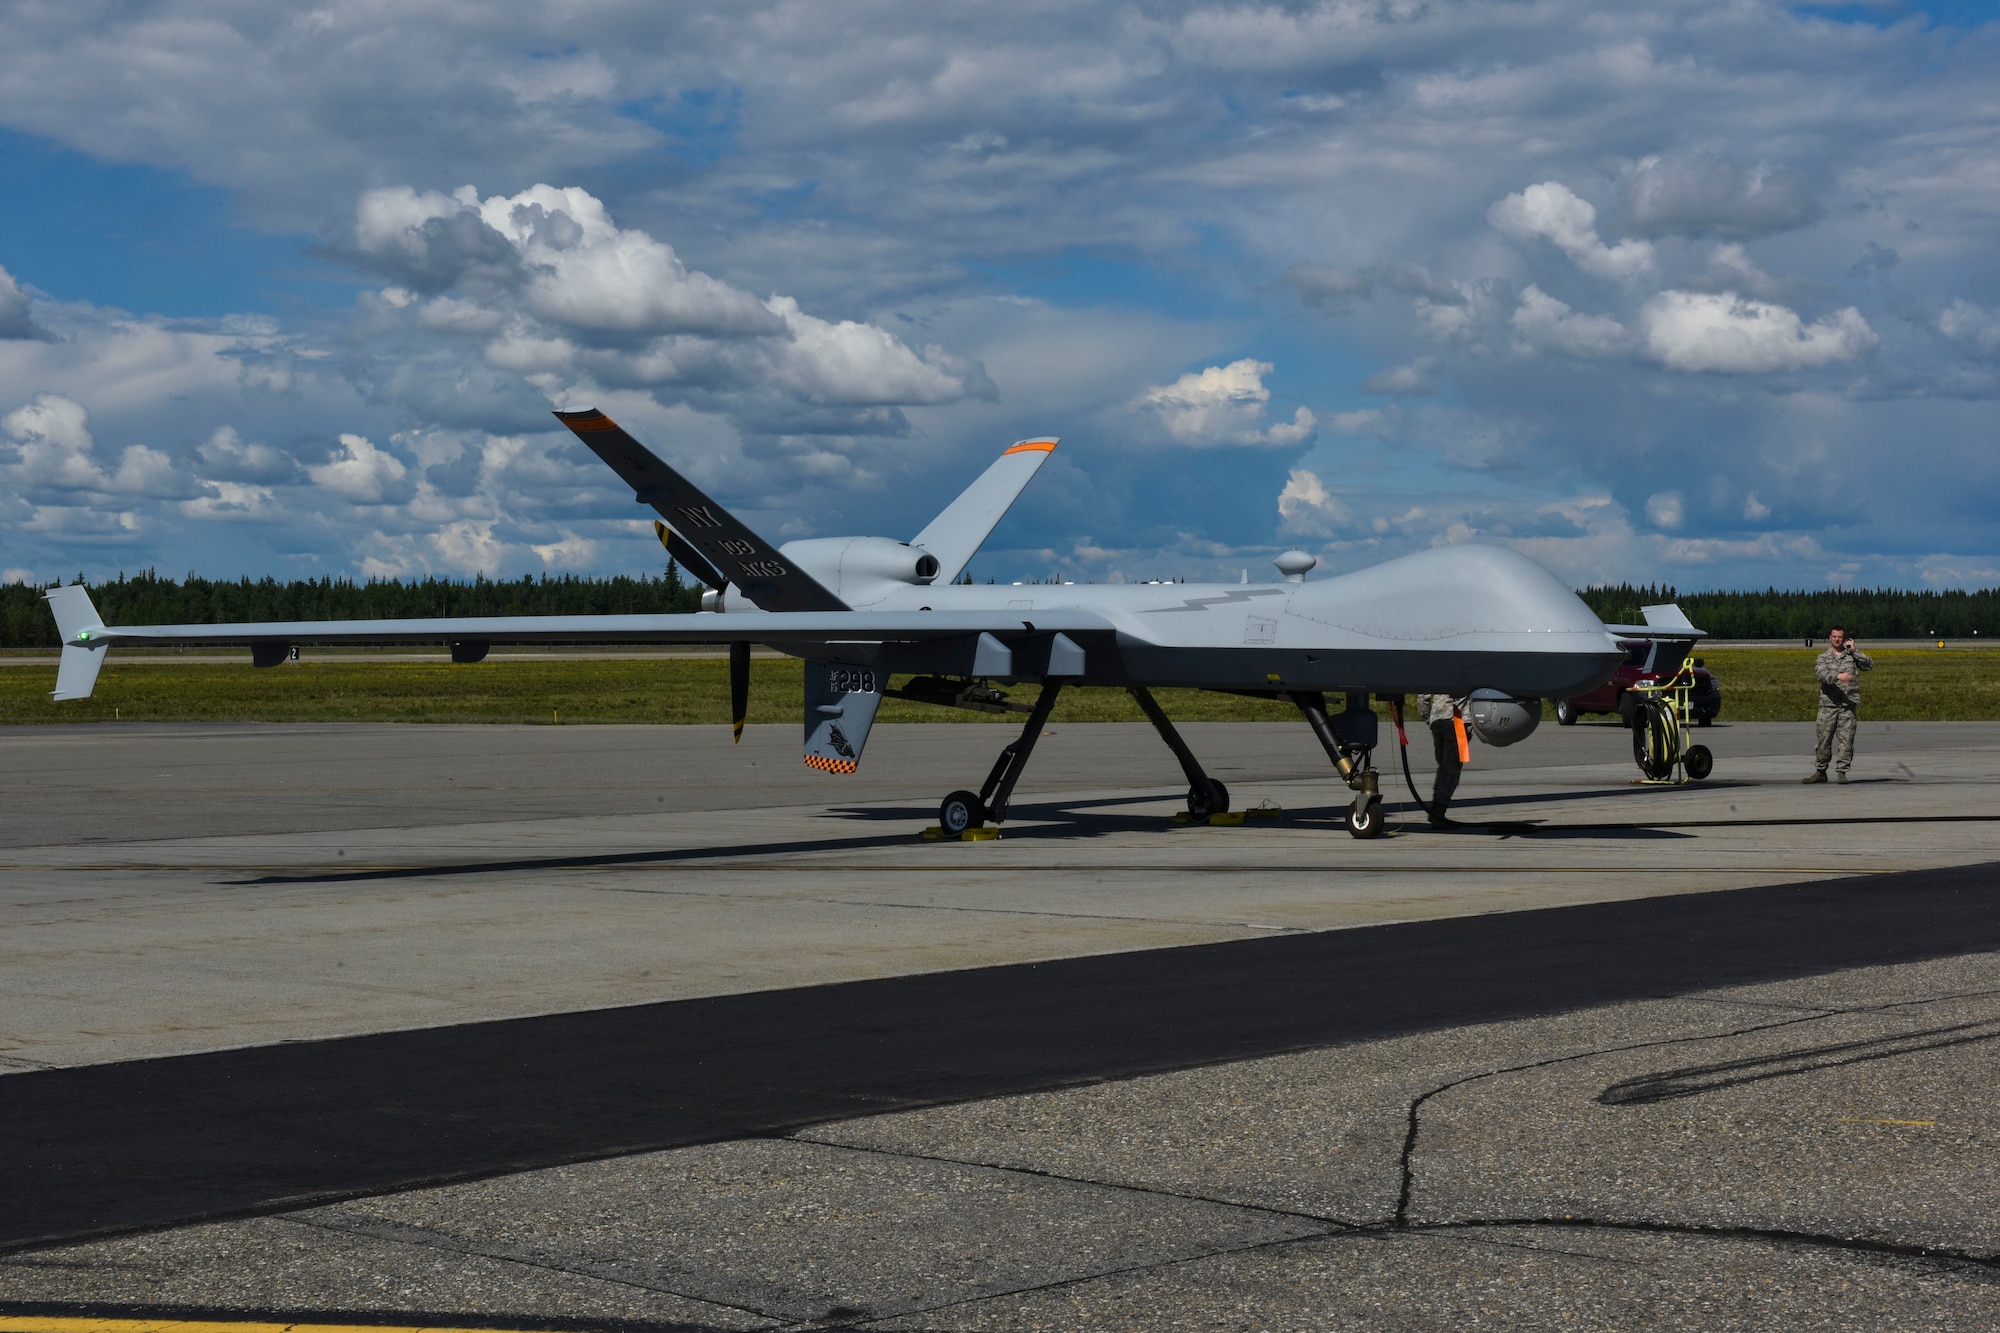 RF-A 19-2 is the first iteration of the exercise to include MQ-9 participation, which allows improved interoperability between traditional and remotely piloted aircraft pilots.